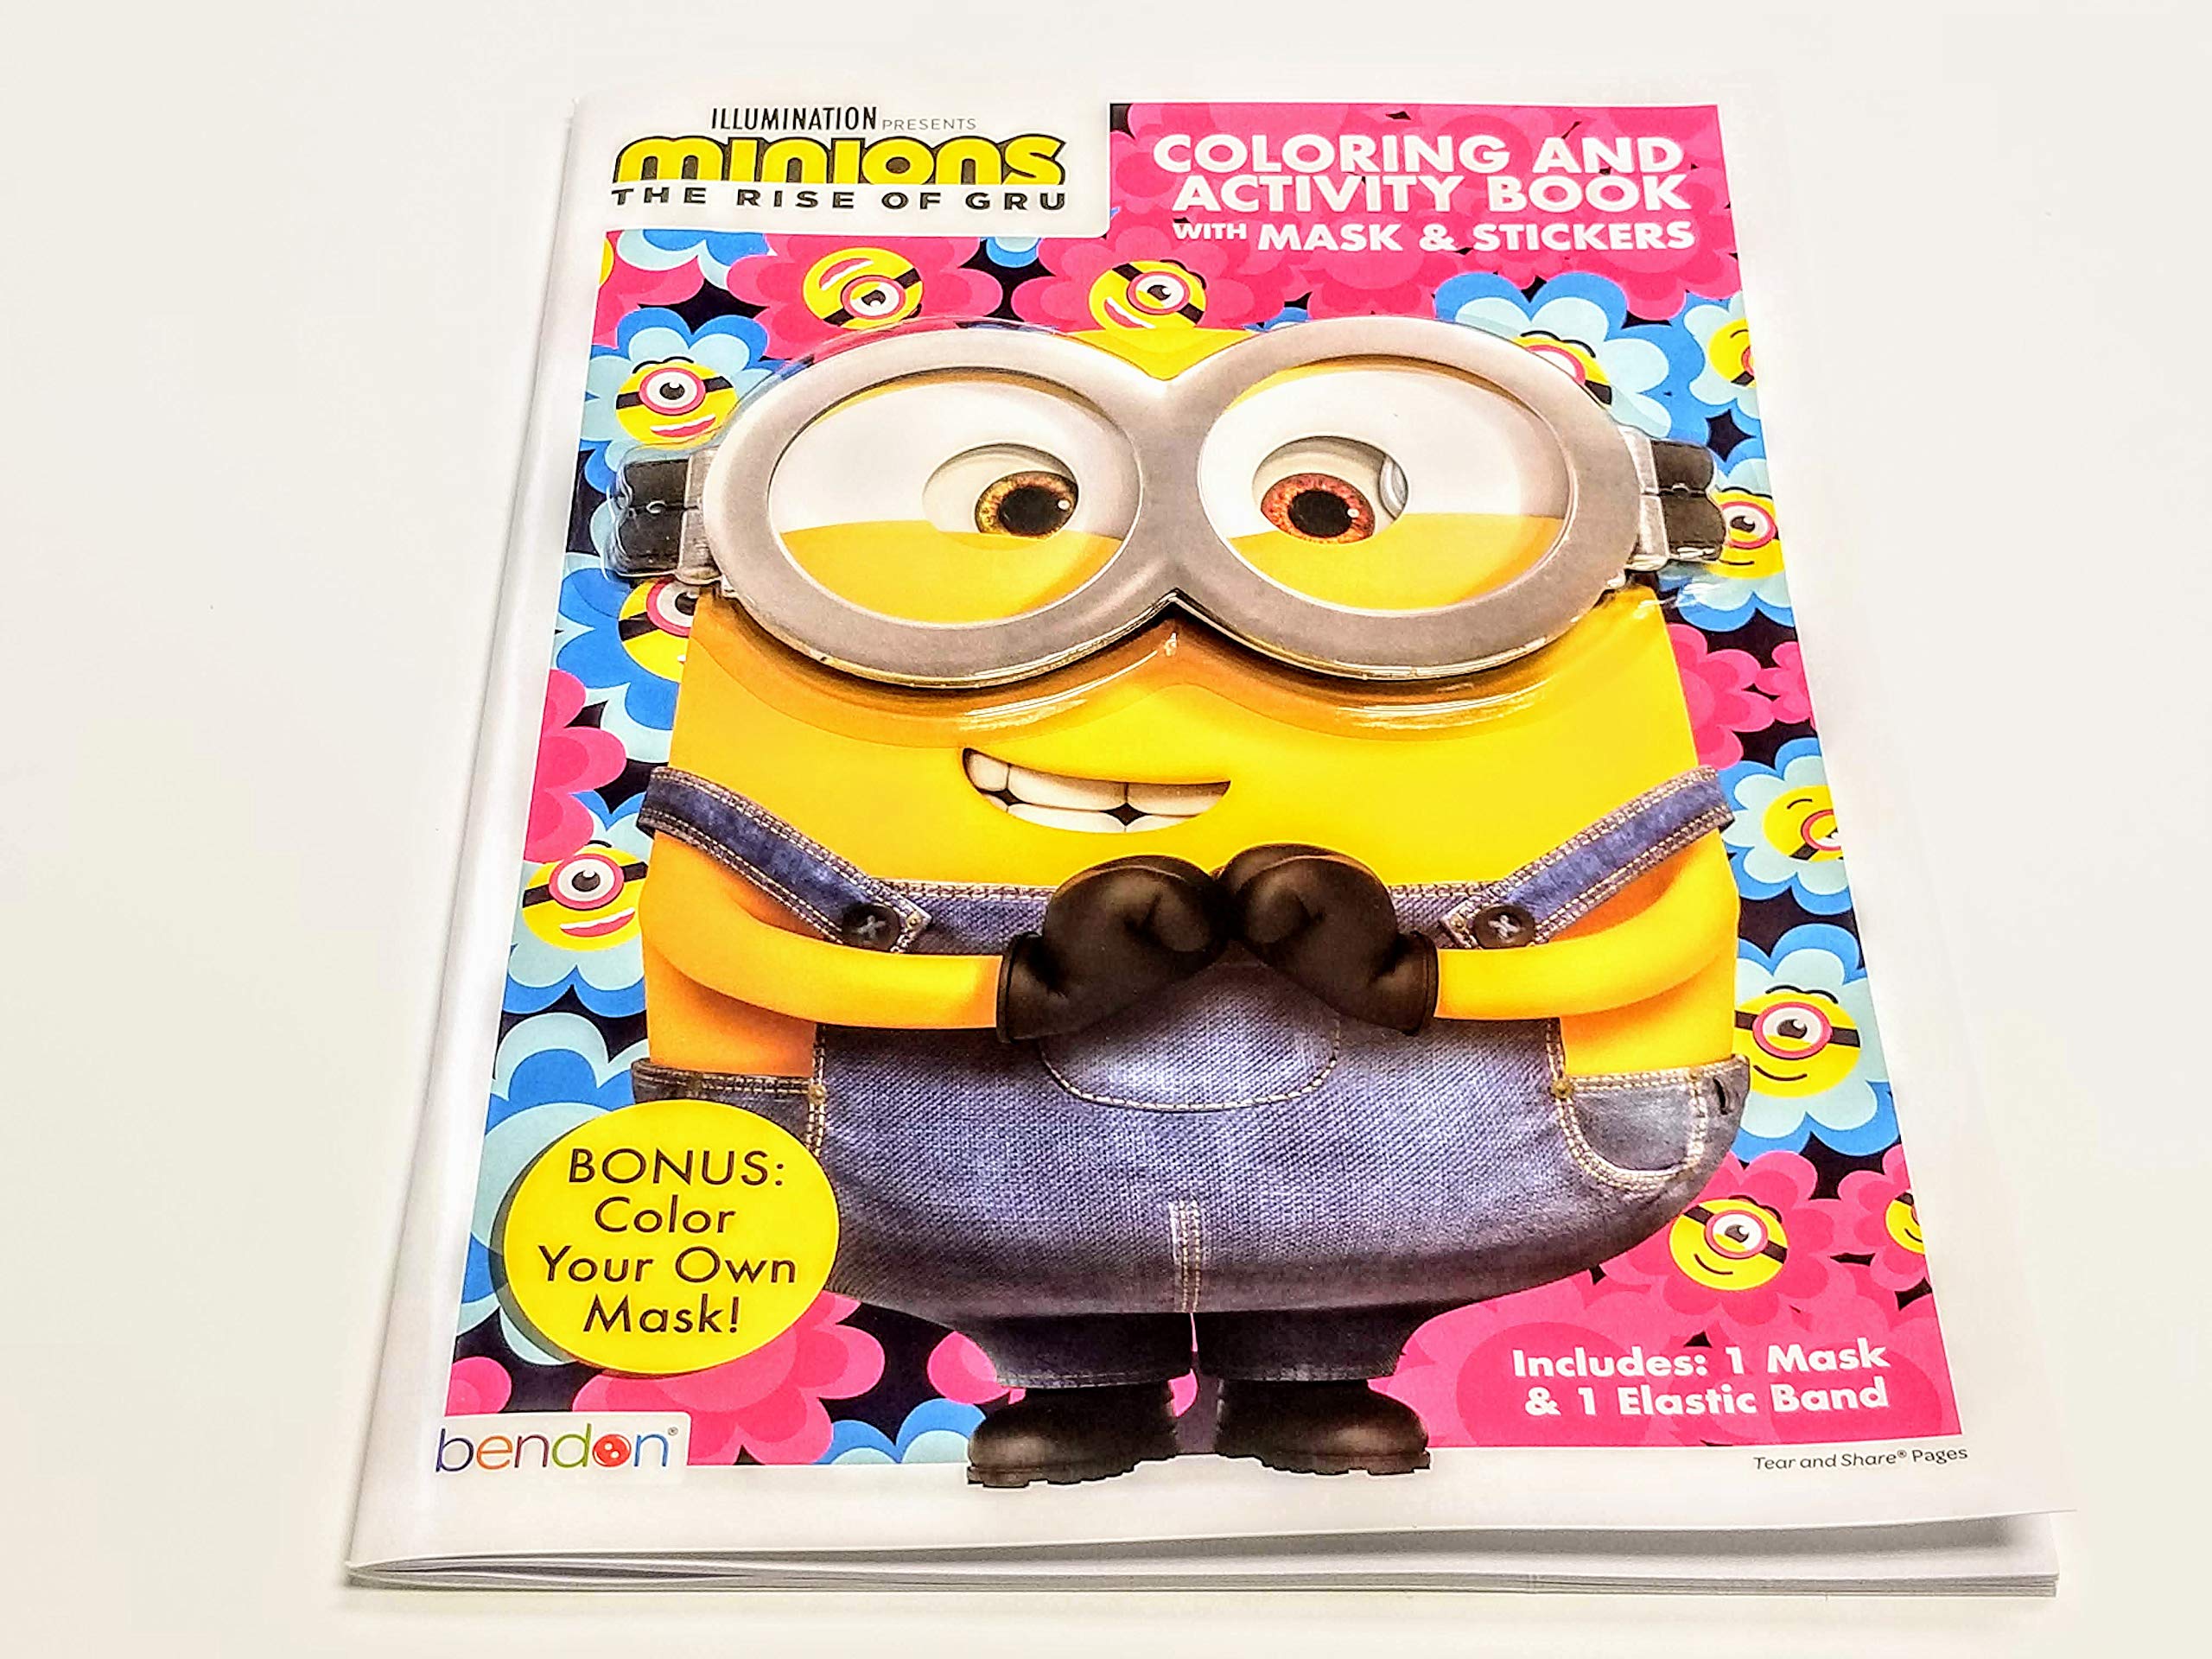 Minions the rise of gru coloring book and drawing book with mask and stickers toys games